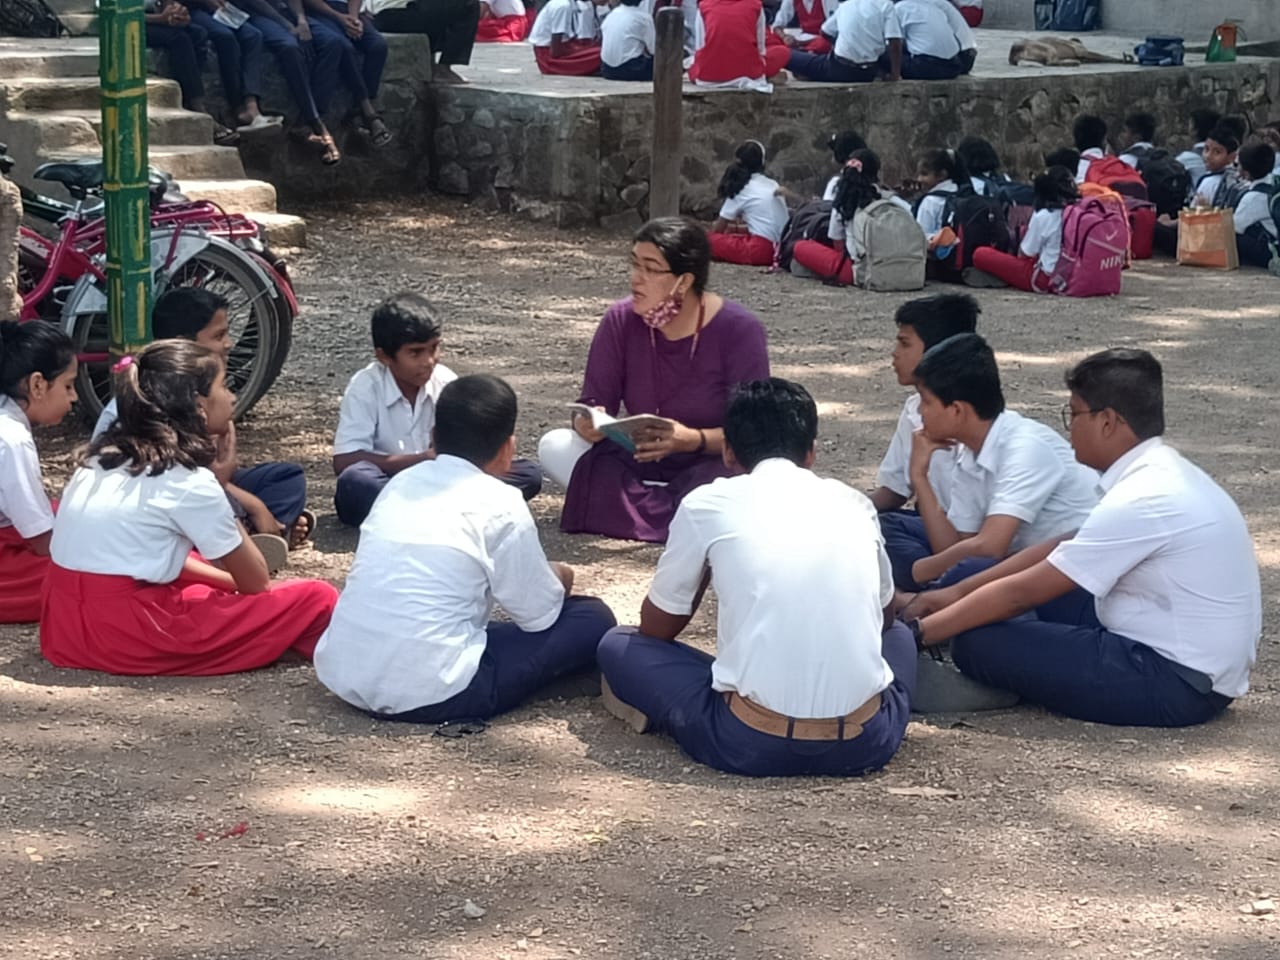 Madhura encourages children to express themselves freely